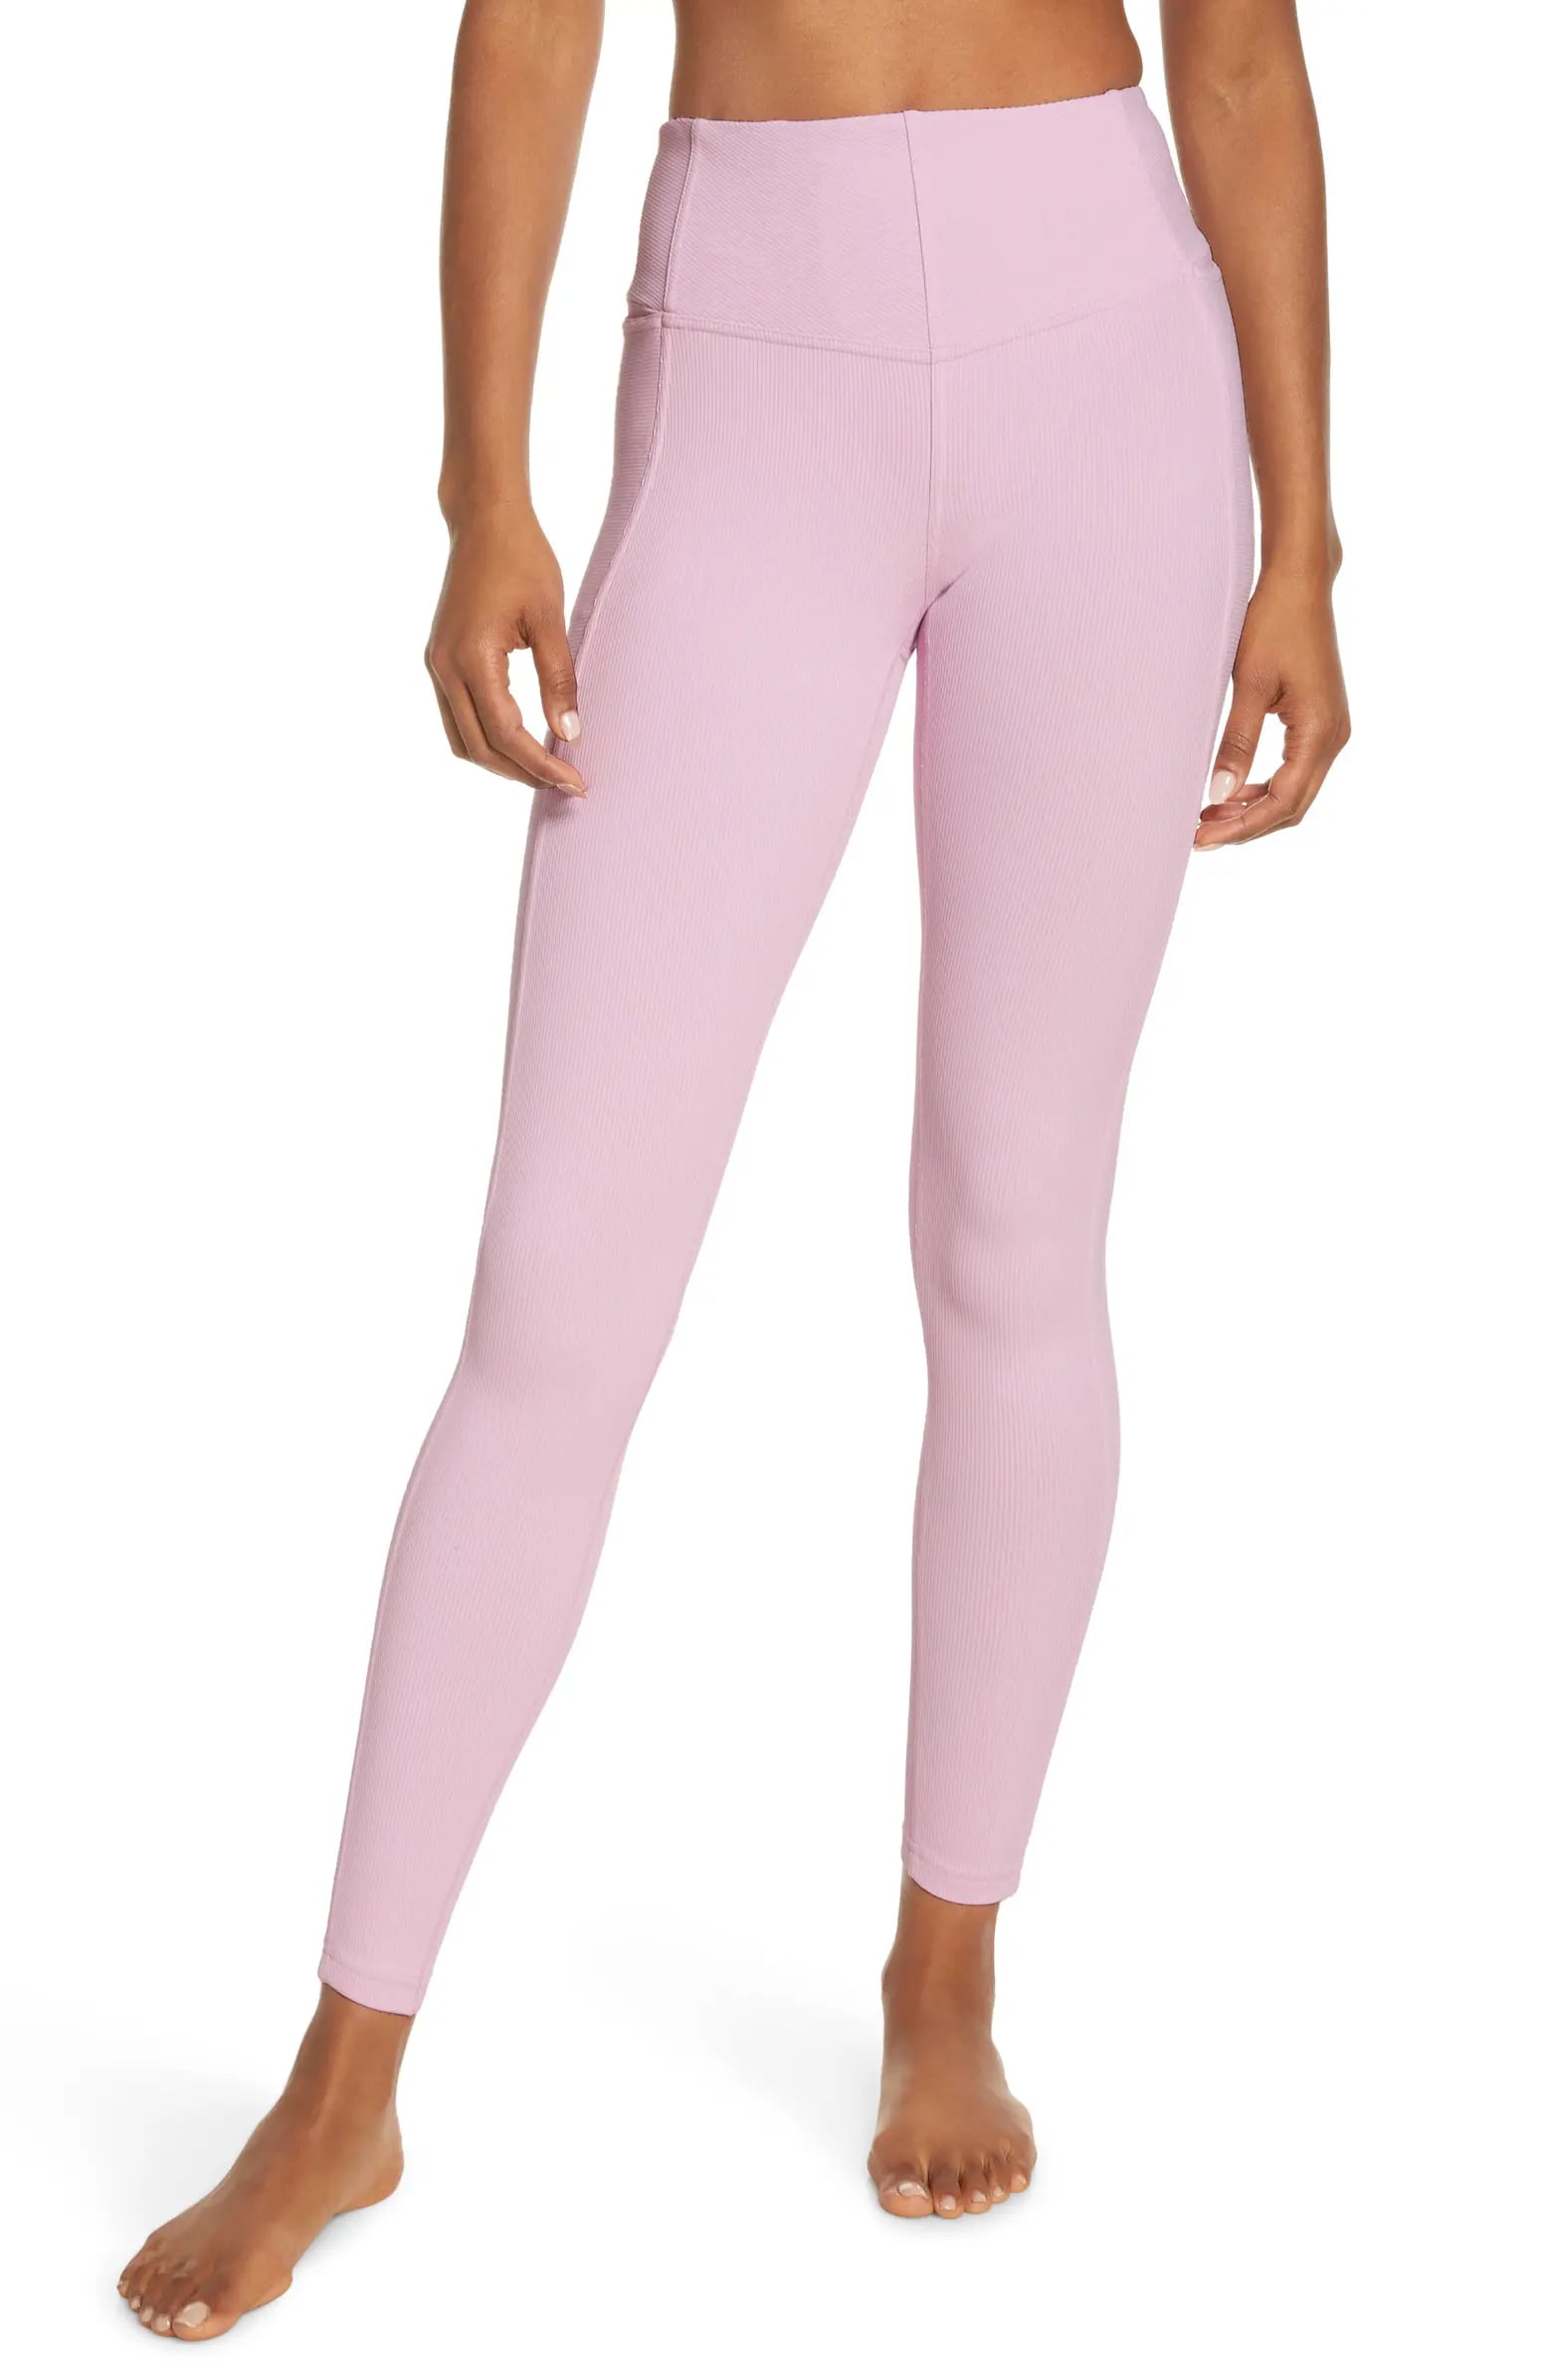 On Our Workout Wish List: Zella Live In Rib Pocket High Waist